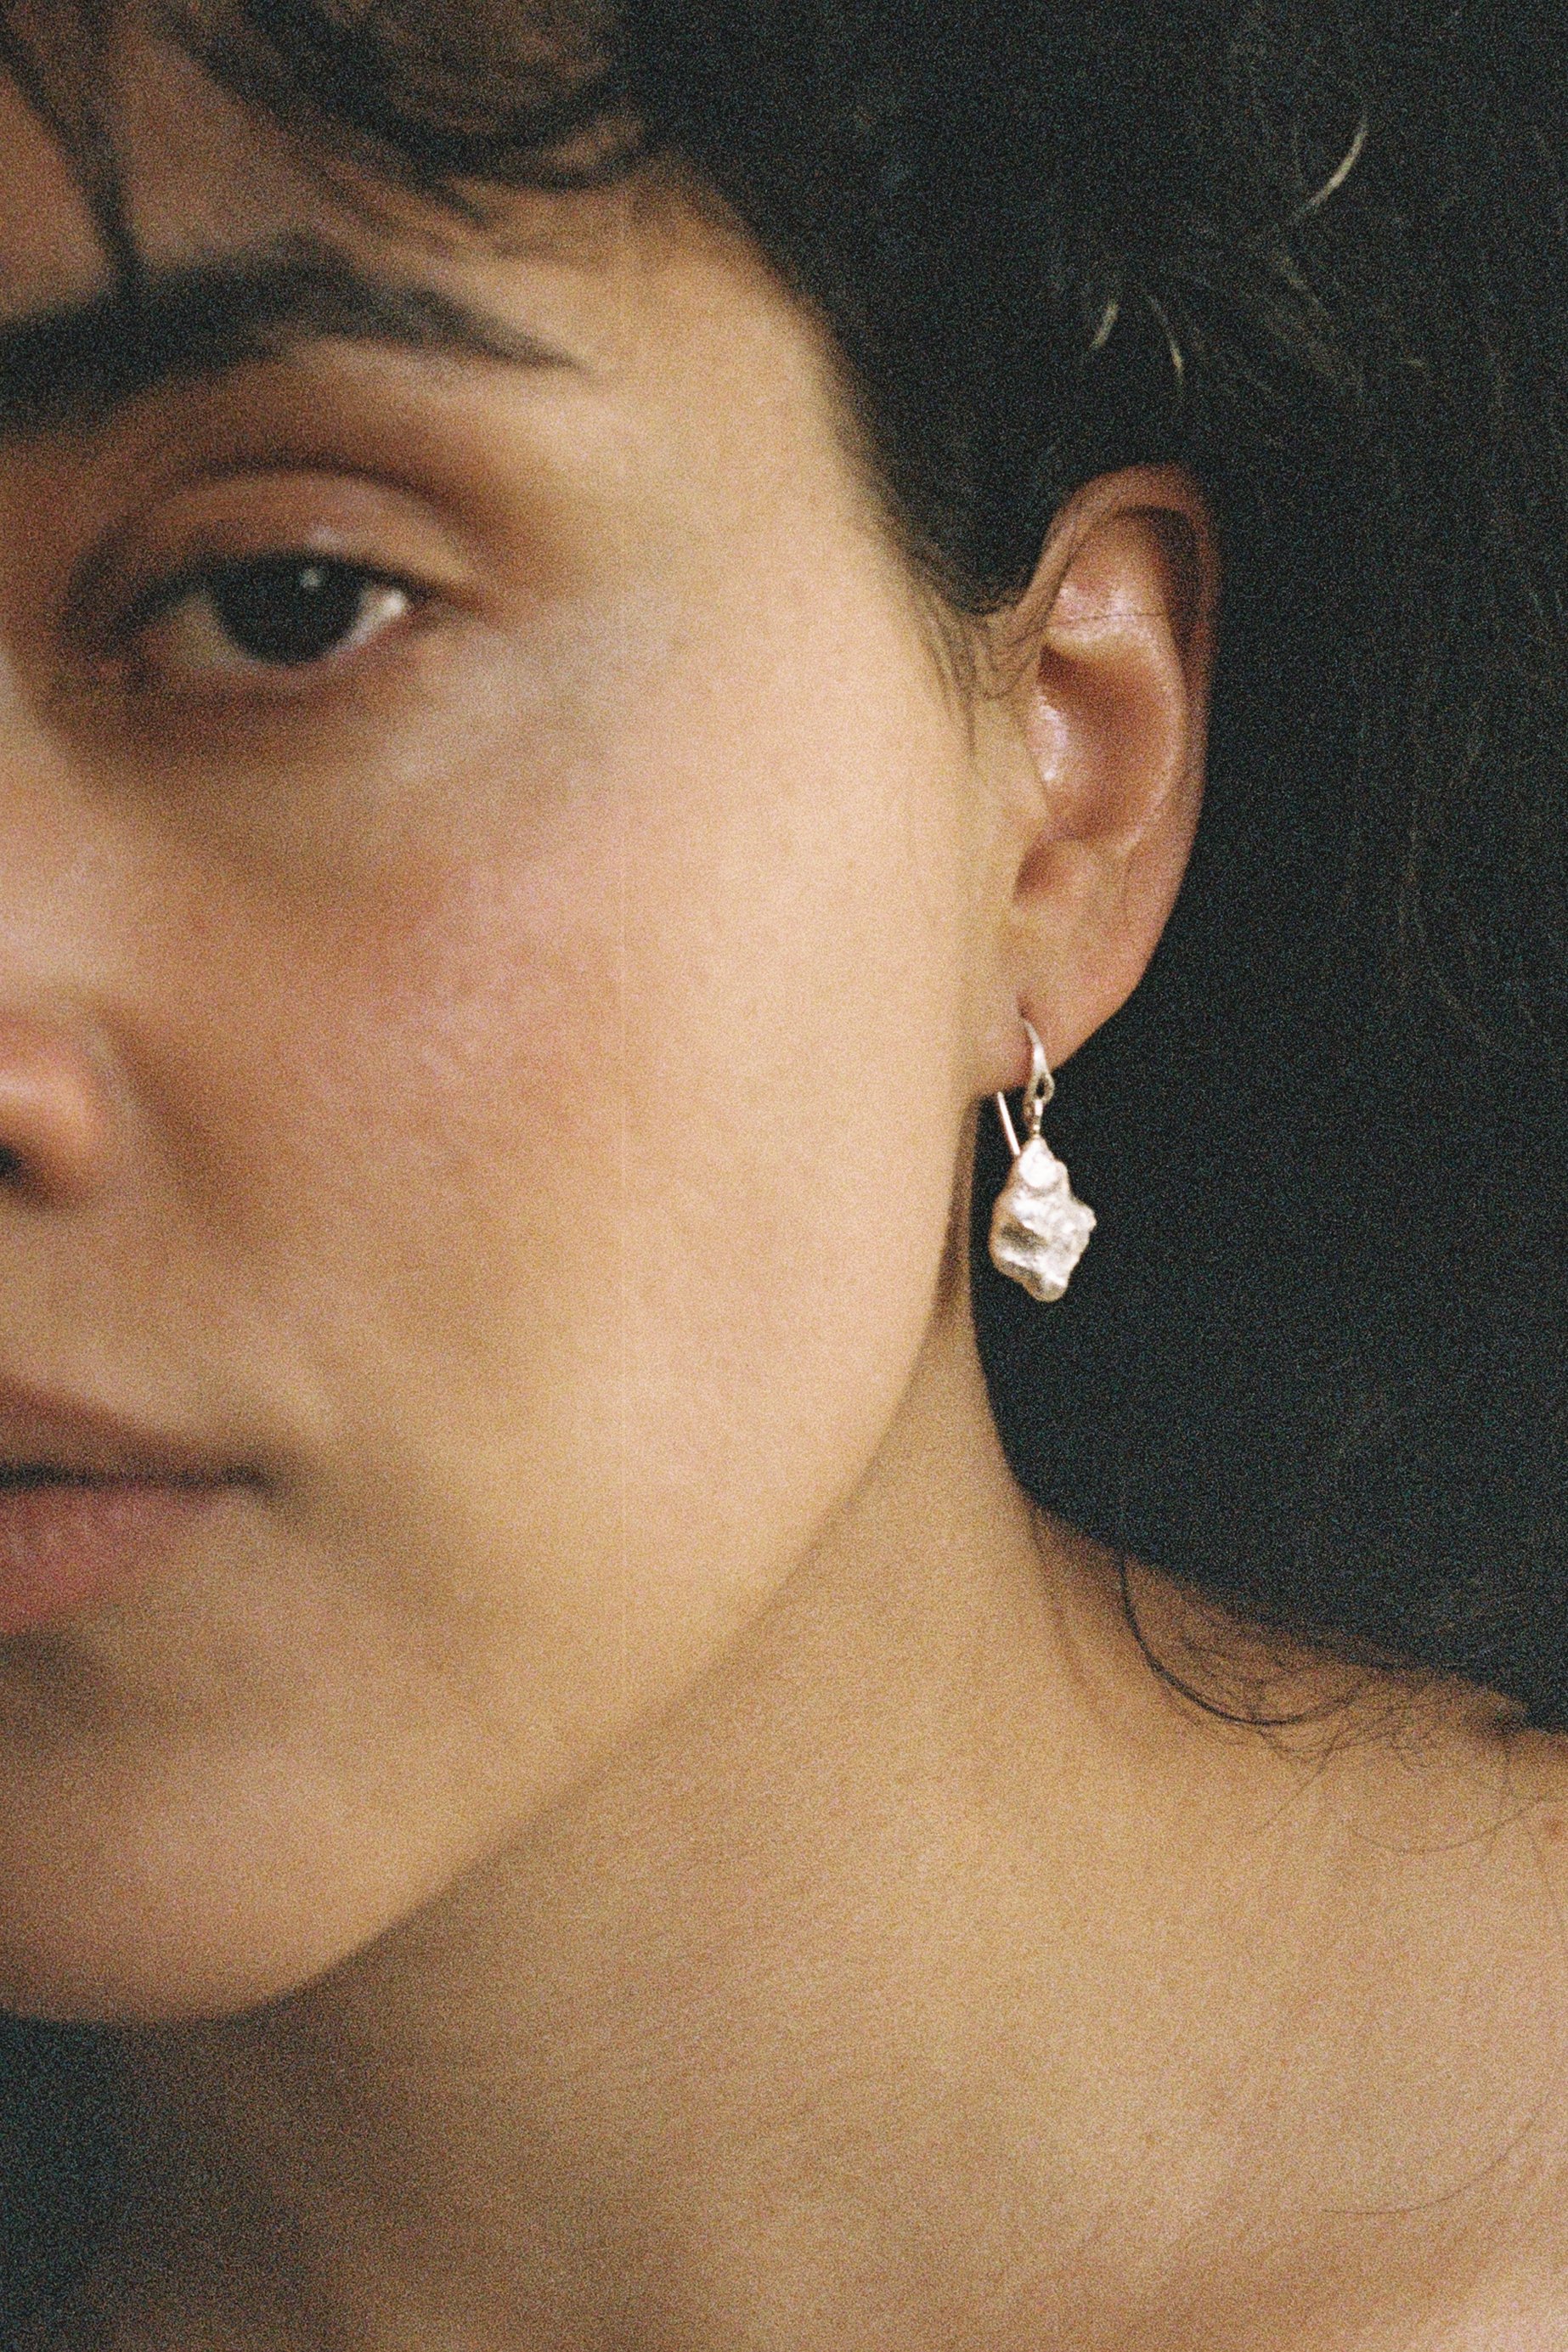 Image of Edition 5. Piece 11. Earrings